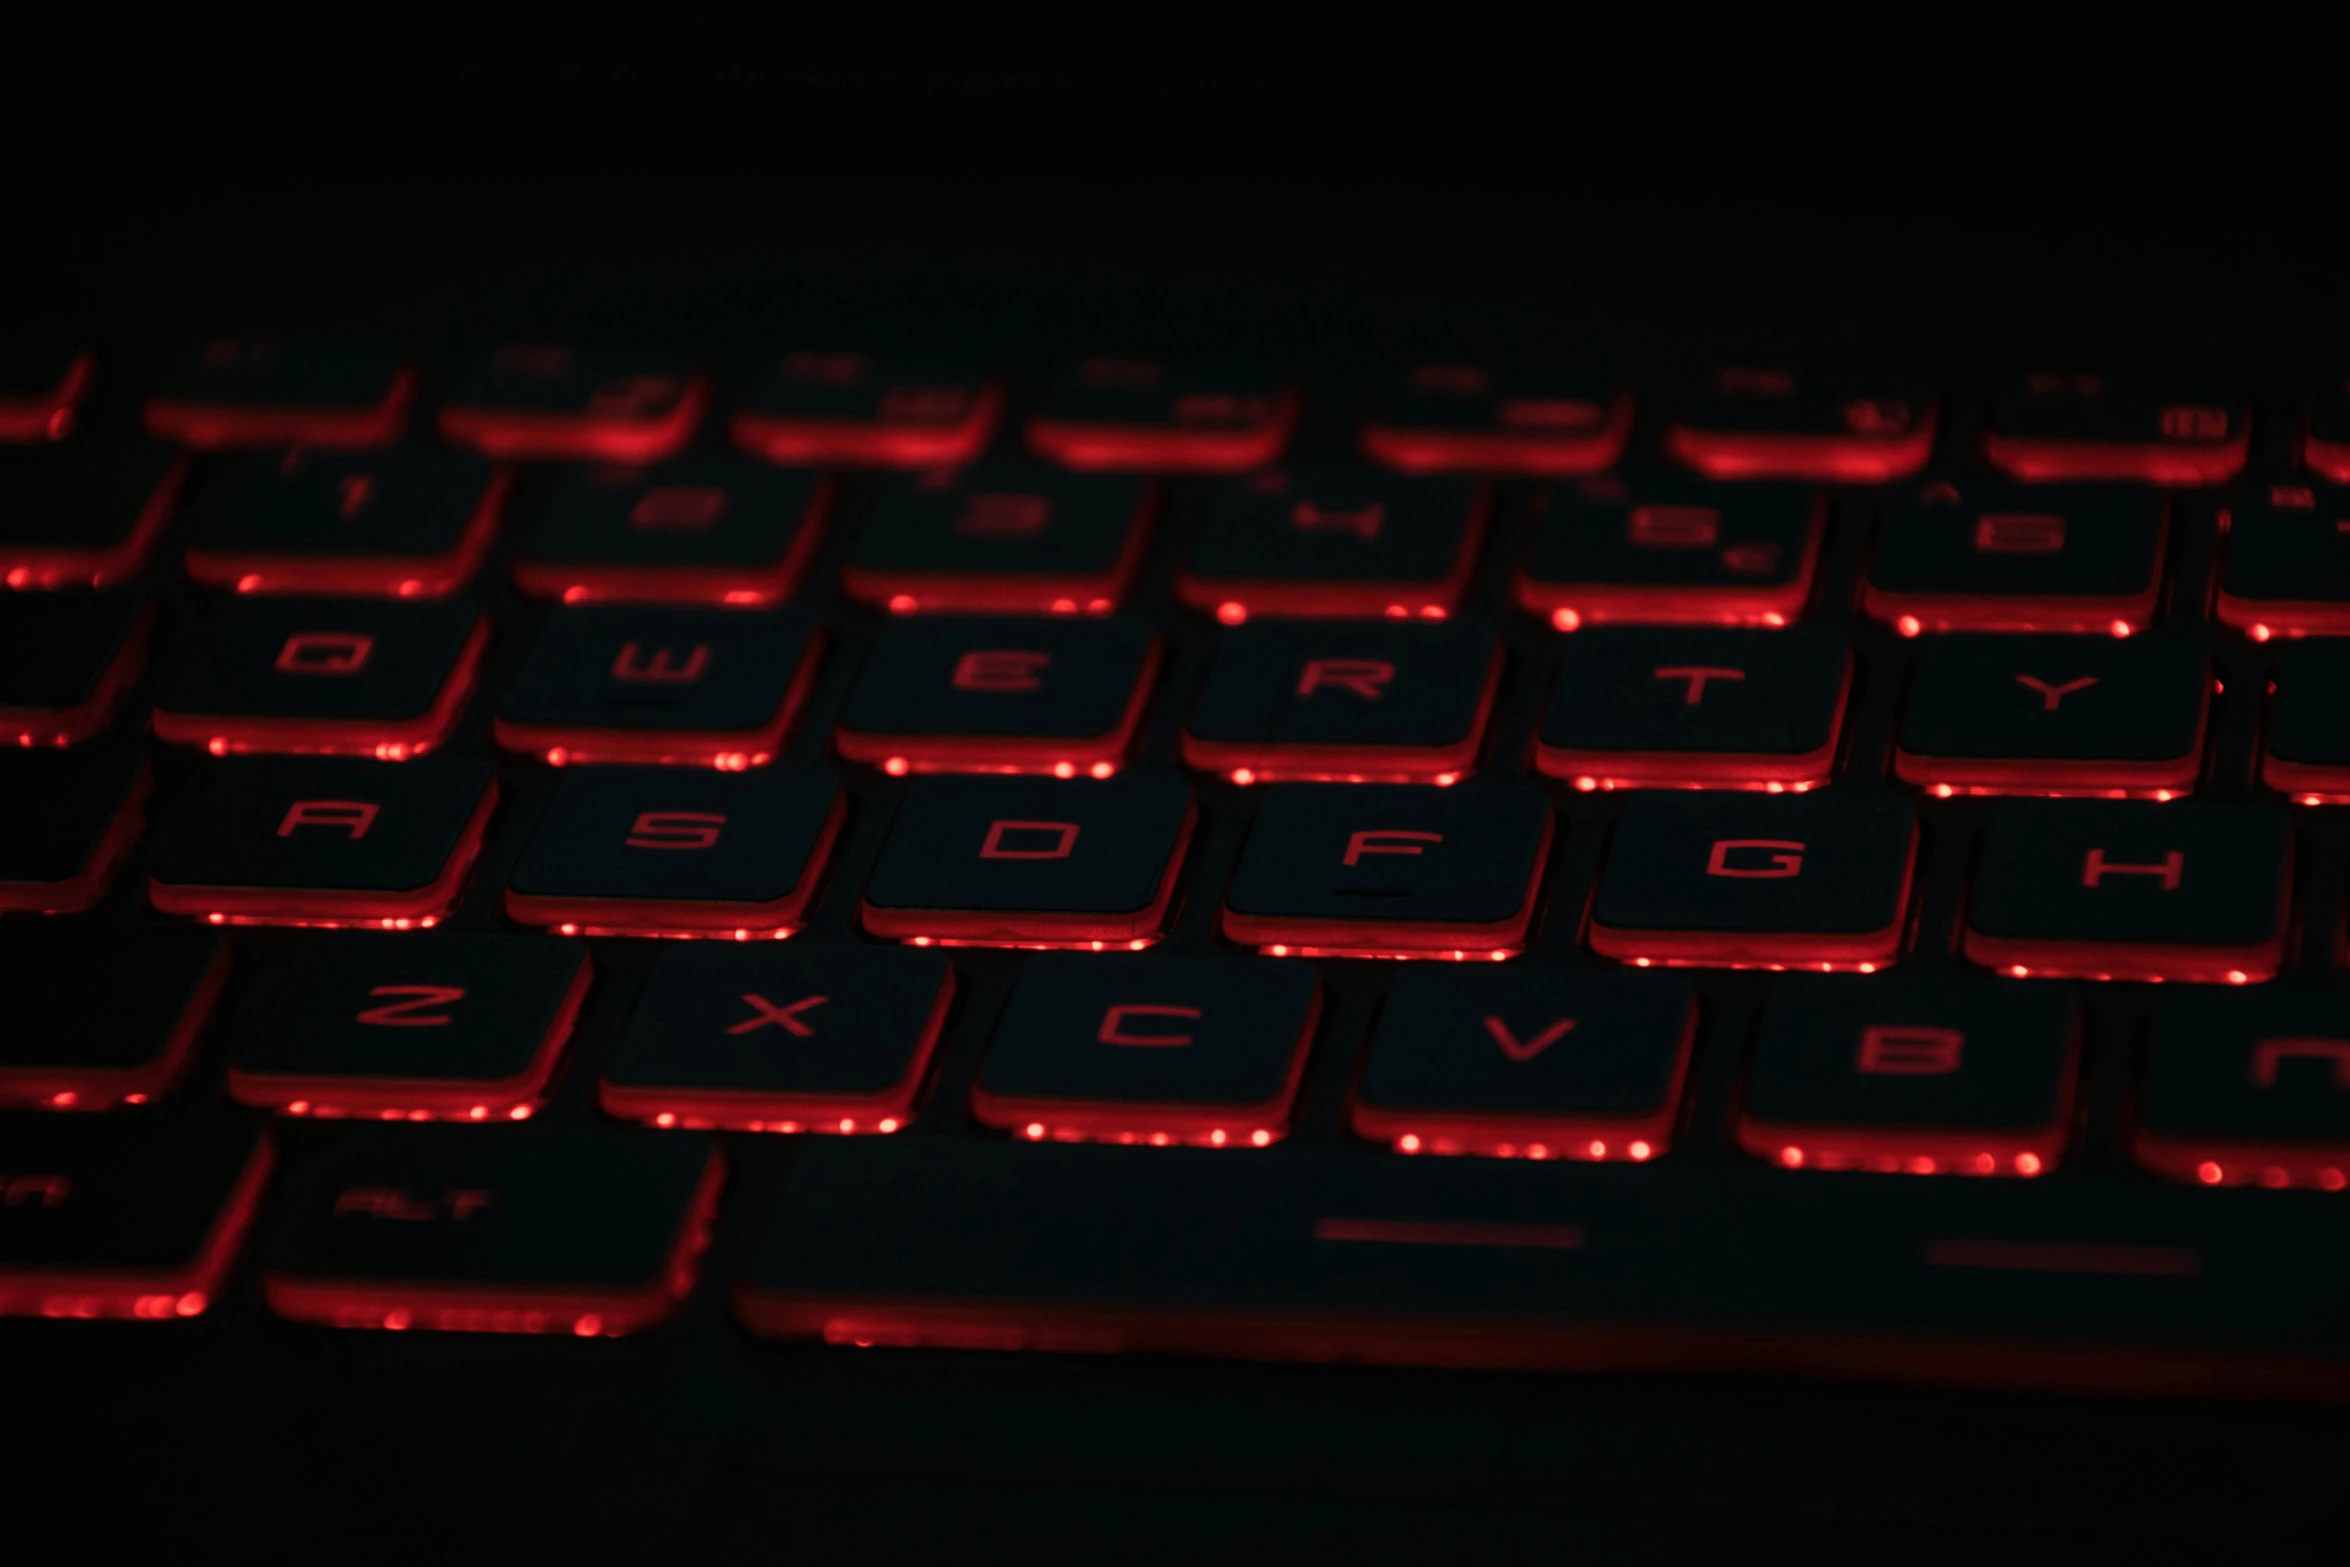 a black background shows a glowing keyboard in red lighting